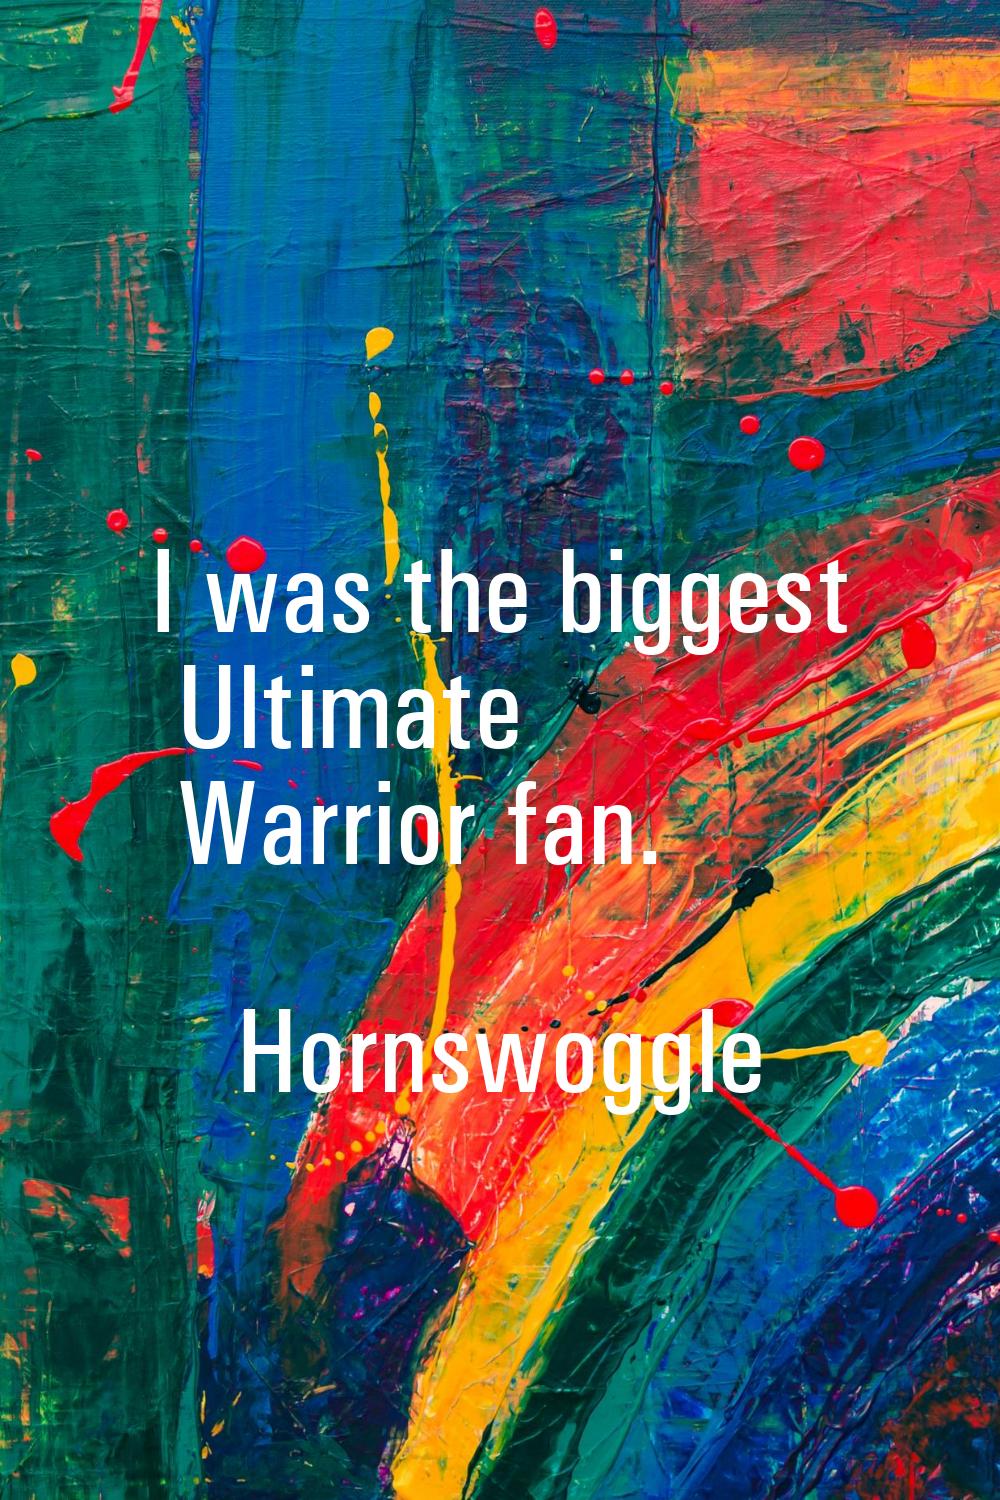 I was the biggest Ultimate Warrior fan.